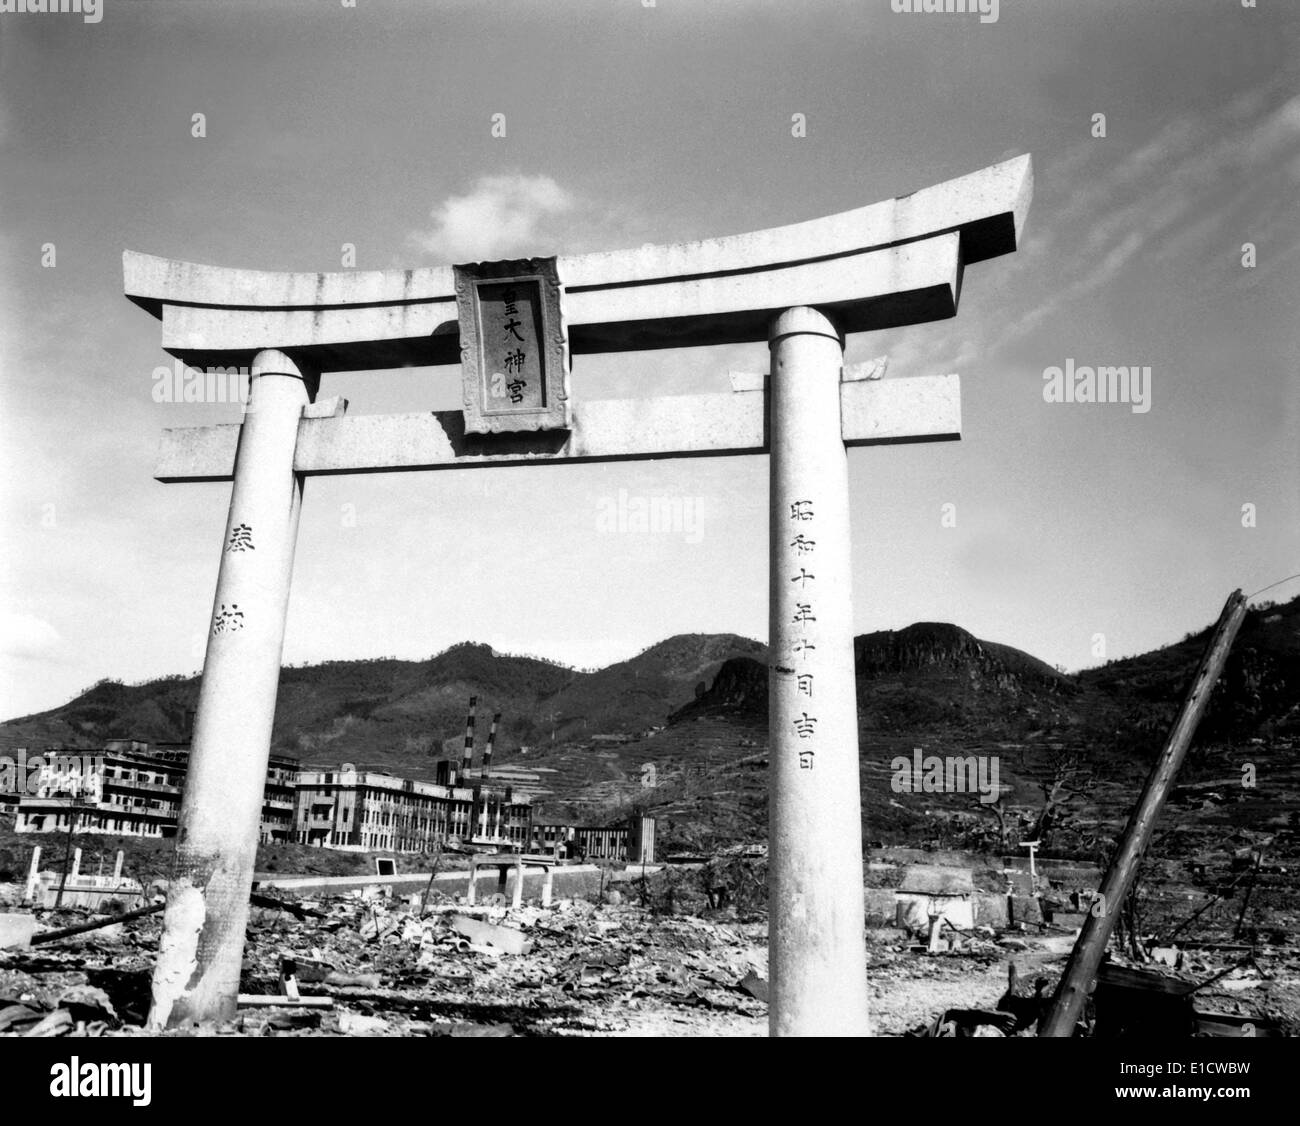 Ruins Of Nagasaki Japan After Atomic Bombing Of August 9 1945 The Arch Of A Shinto Shrine Survived The Blast And Heat Oct Stock Photo Alamy